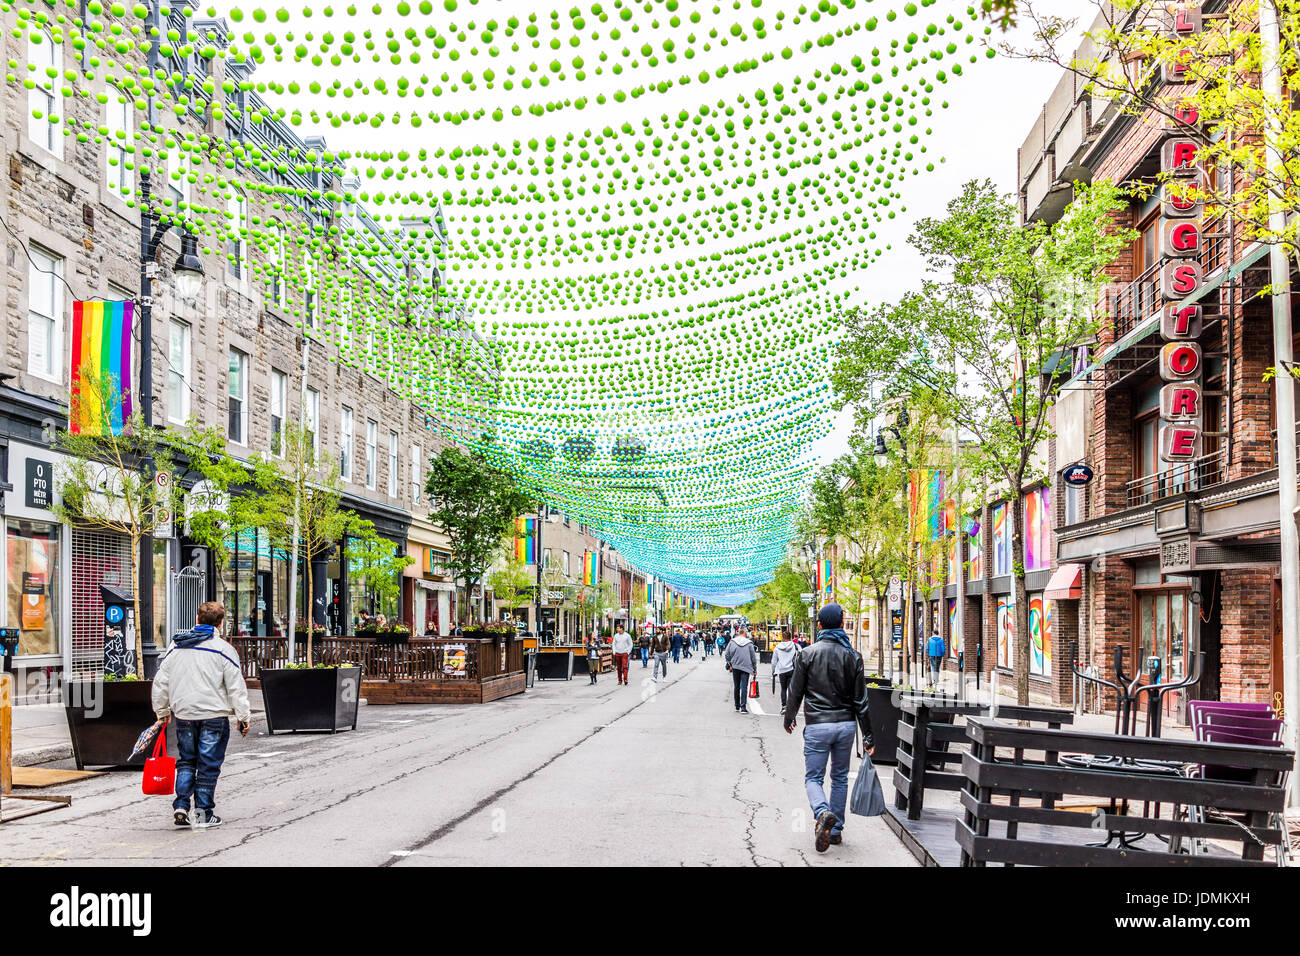 Montreal, Canada - May 26, 2017: People walking on Sainte Catherine street in Montreal's Gay Village in Quebec region with hanging decorations Stock Photo